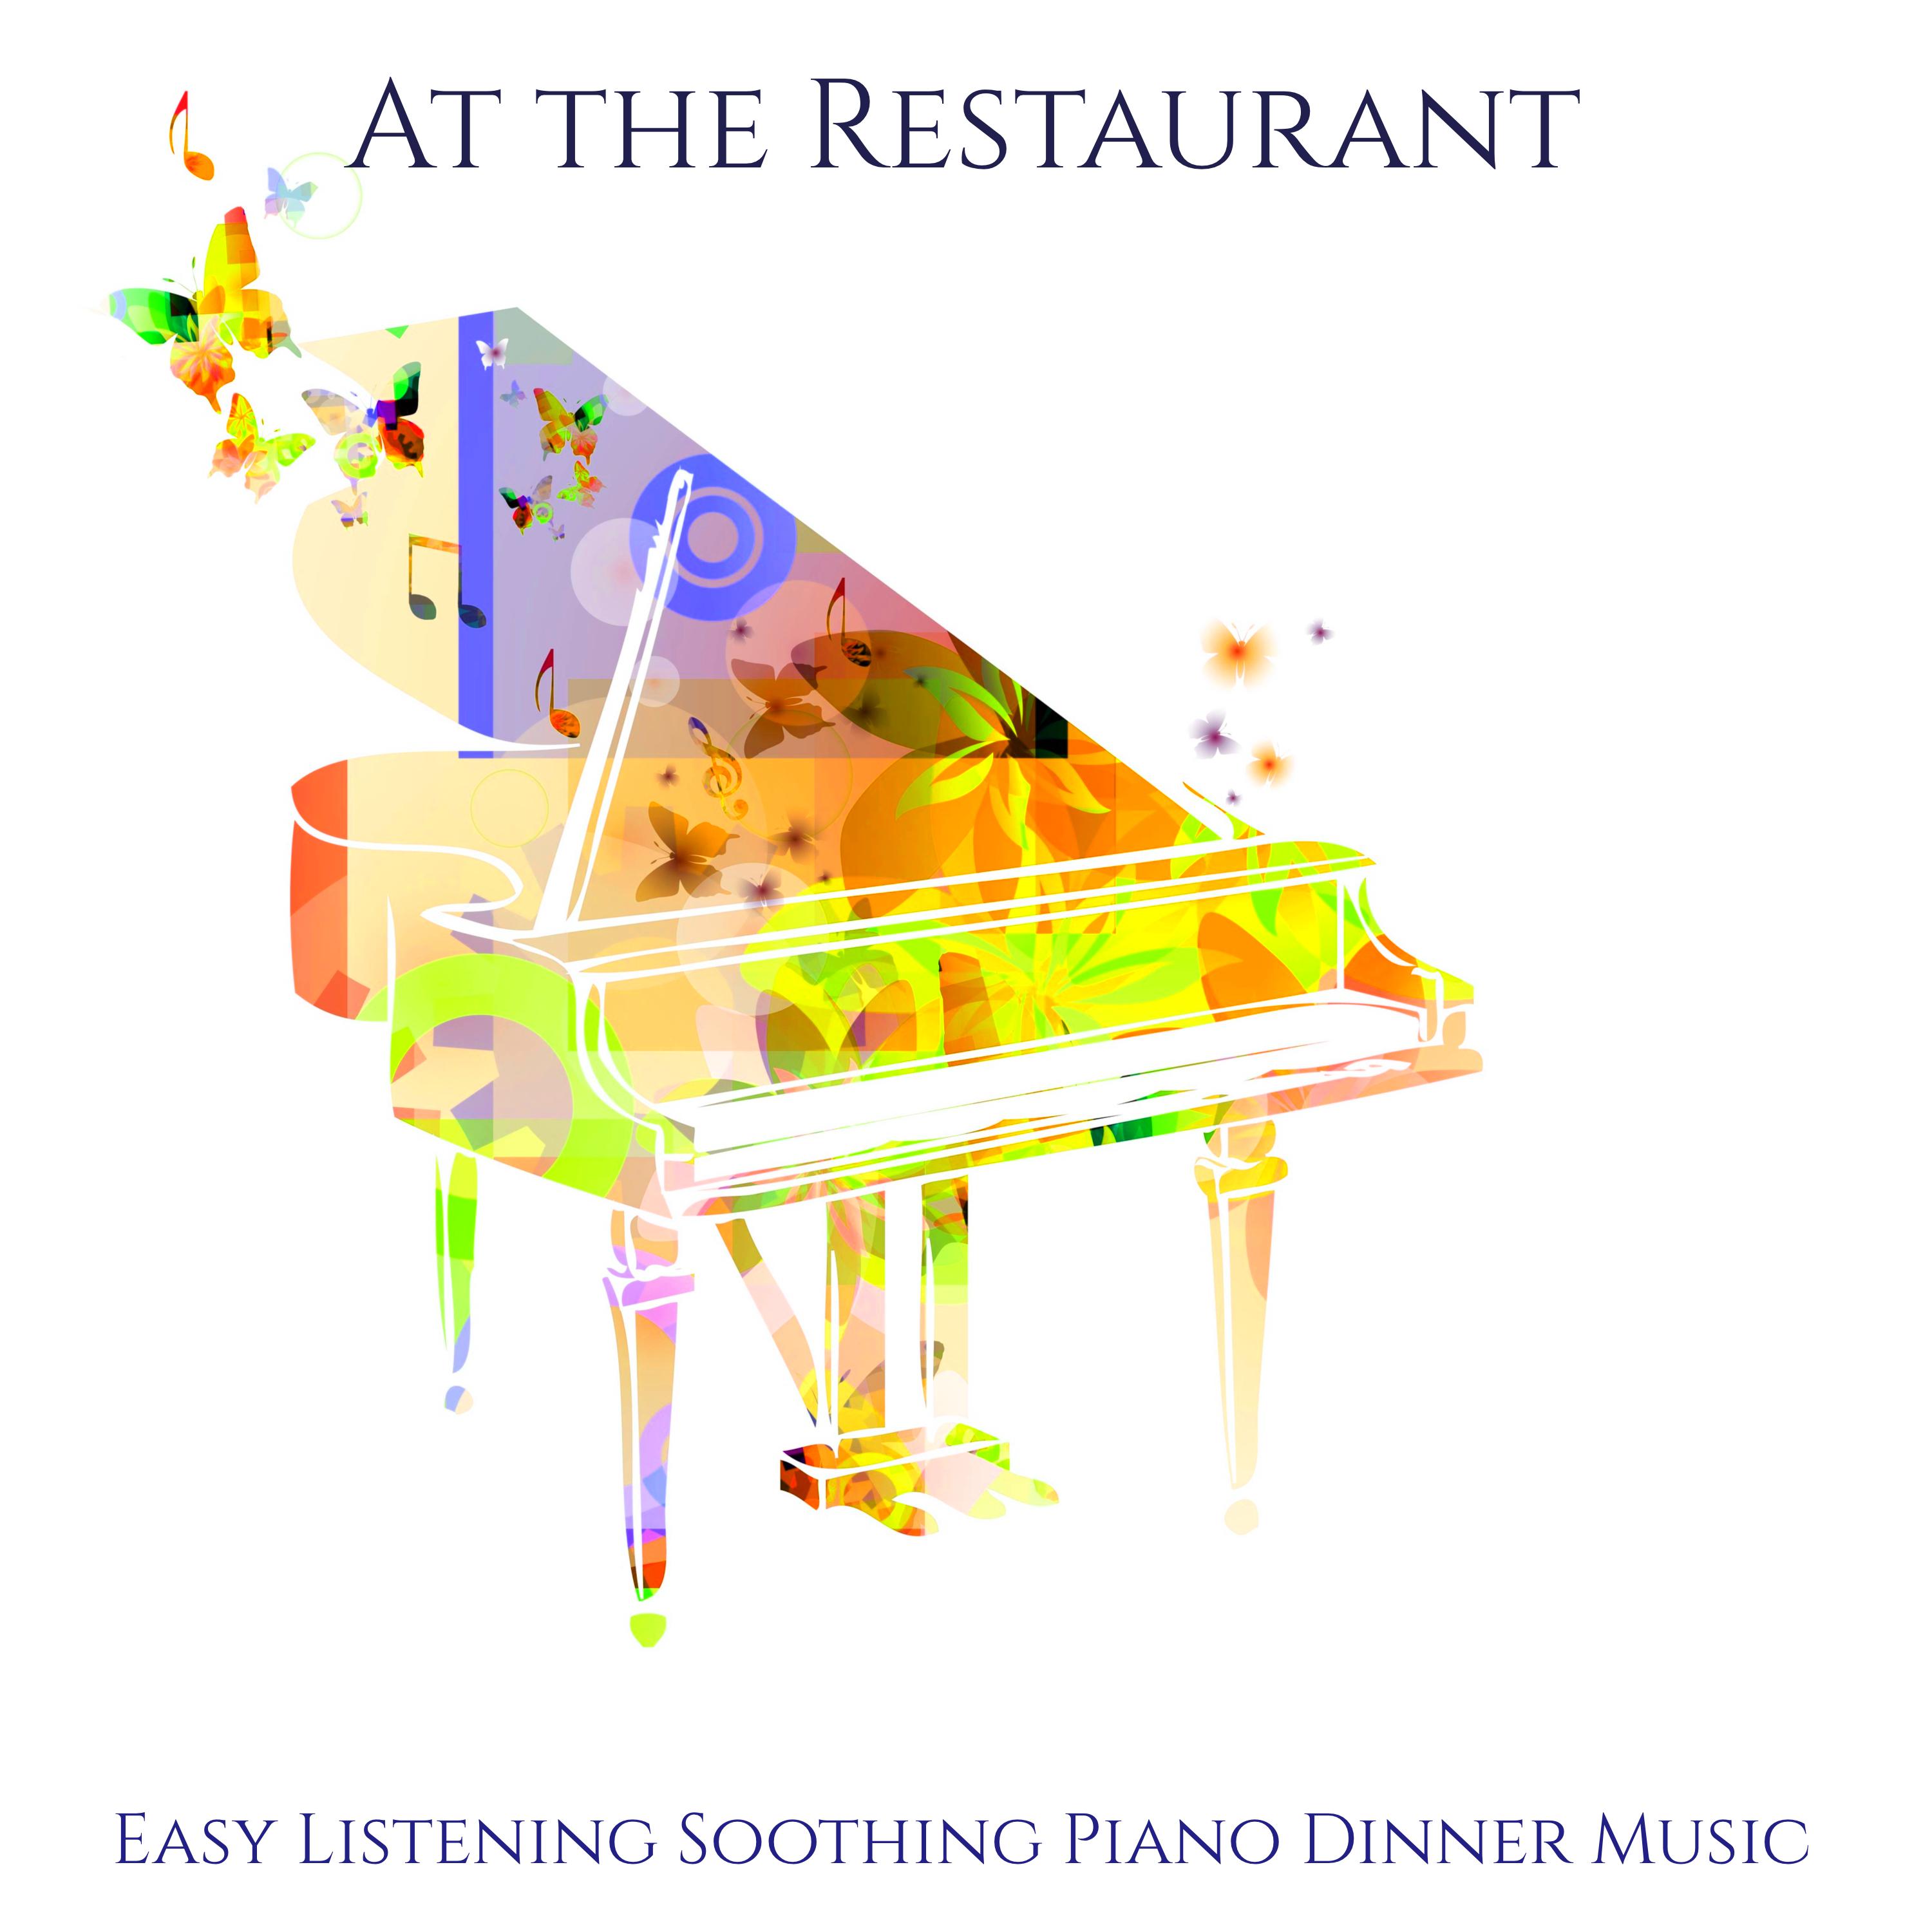 At the Restaurant  Easy Listening Soothing Piano Dinner Music